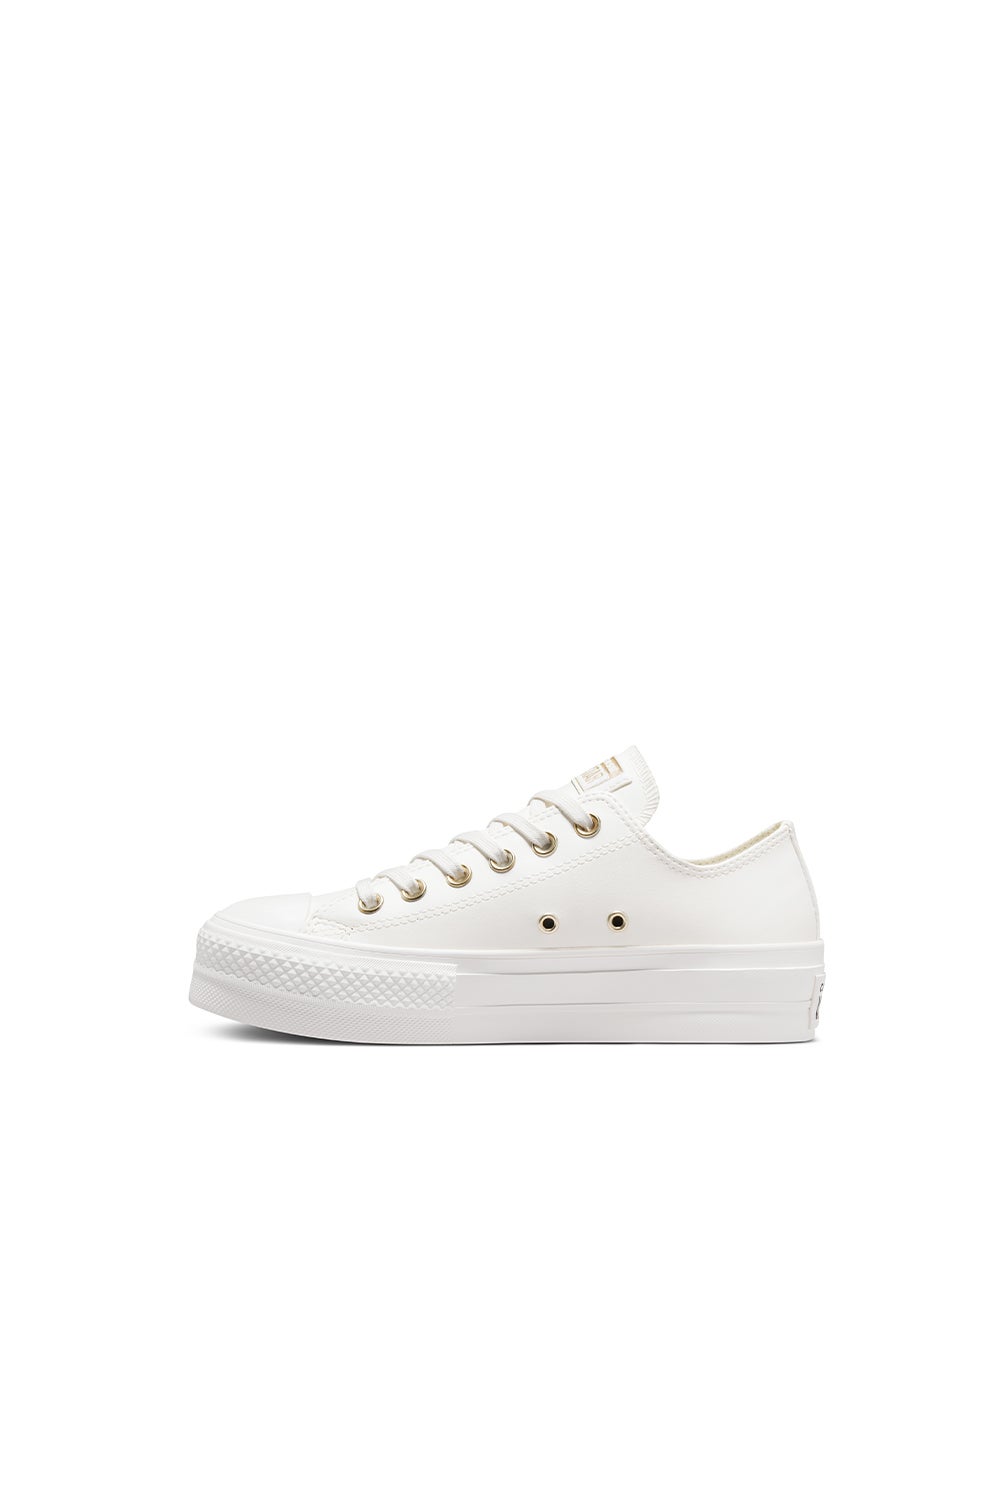 Converse Chuck Taylor All Star Lift Low Top Vintage White